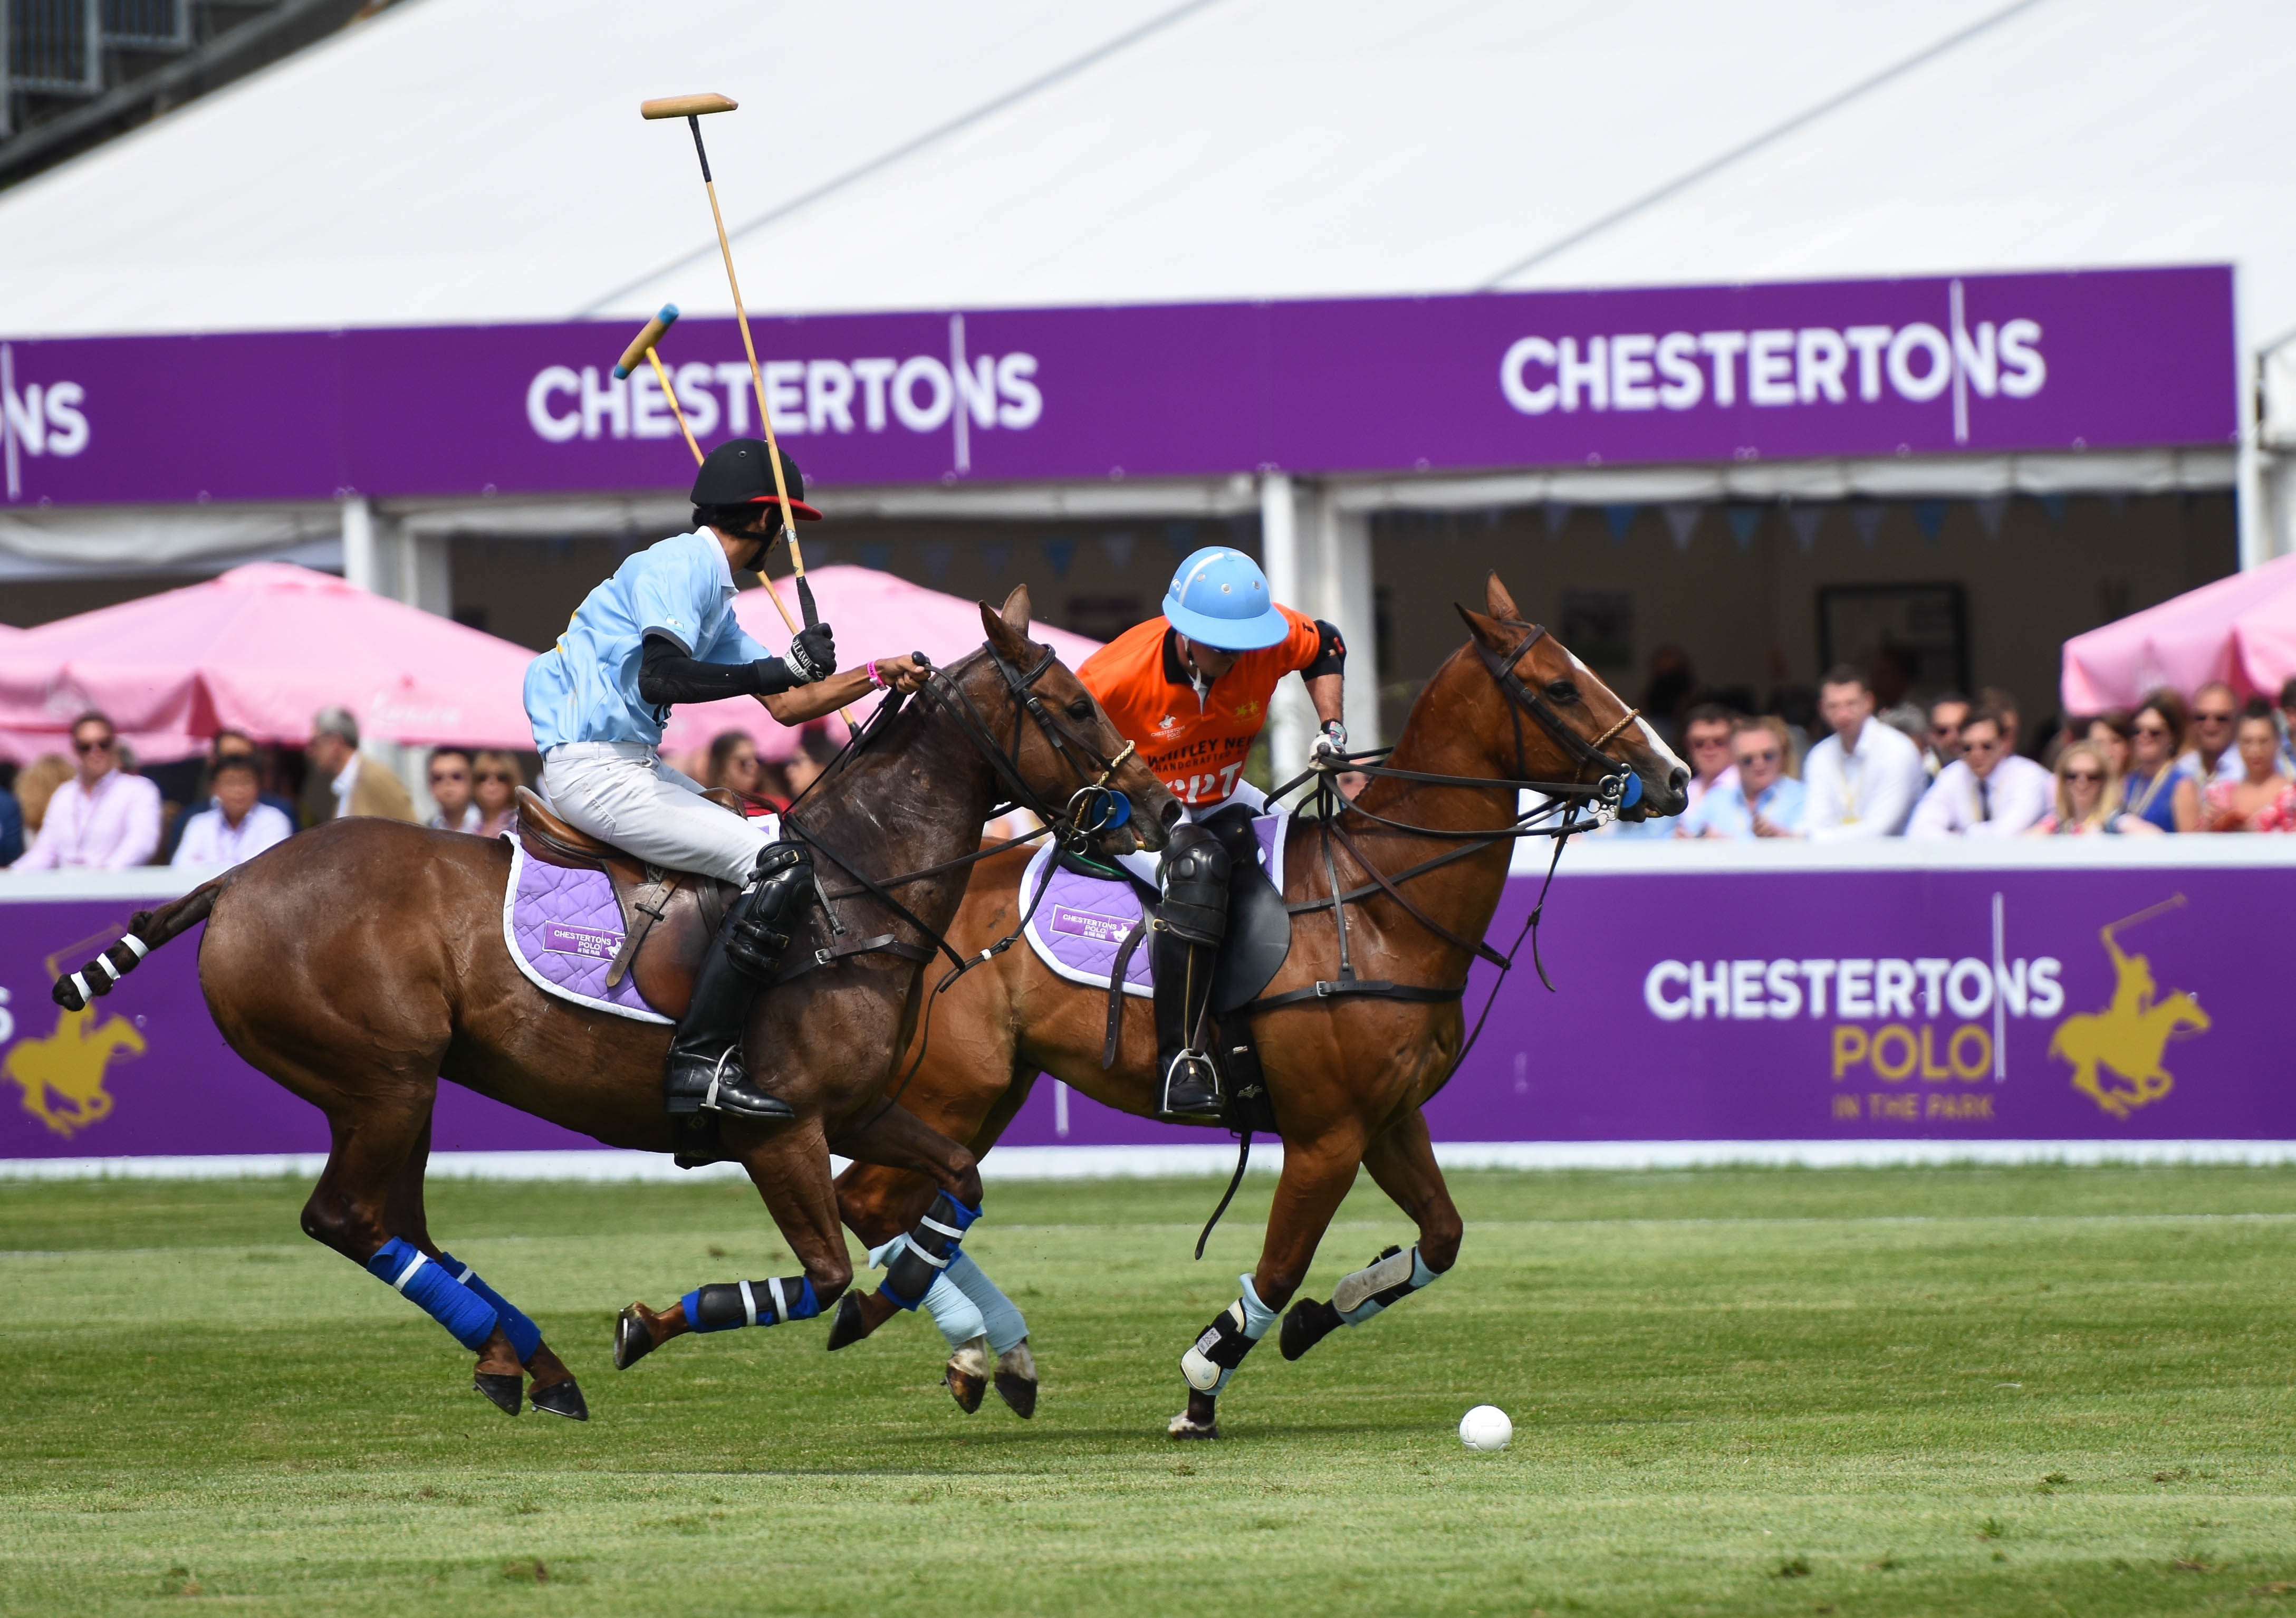 Polo players in action at Chestertons Polo in The Park.